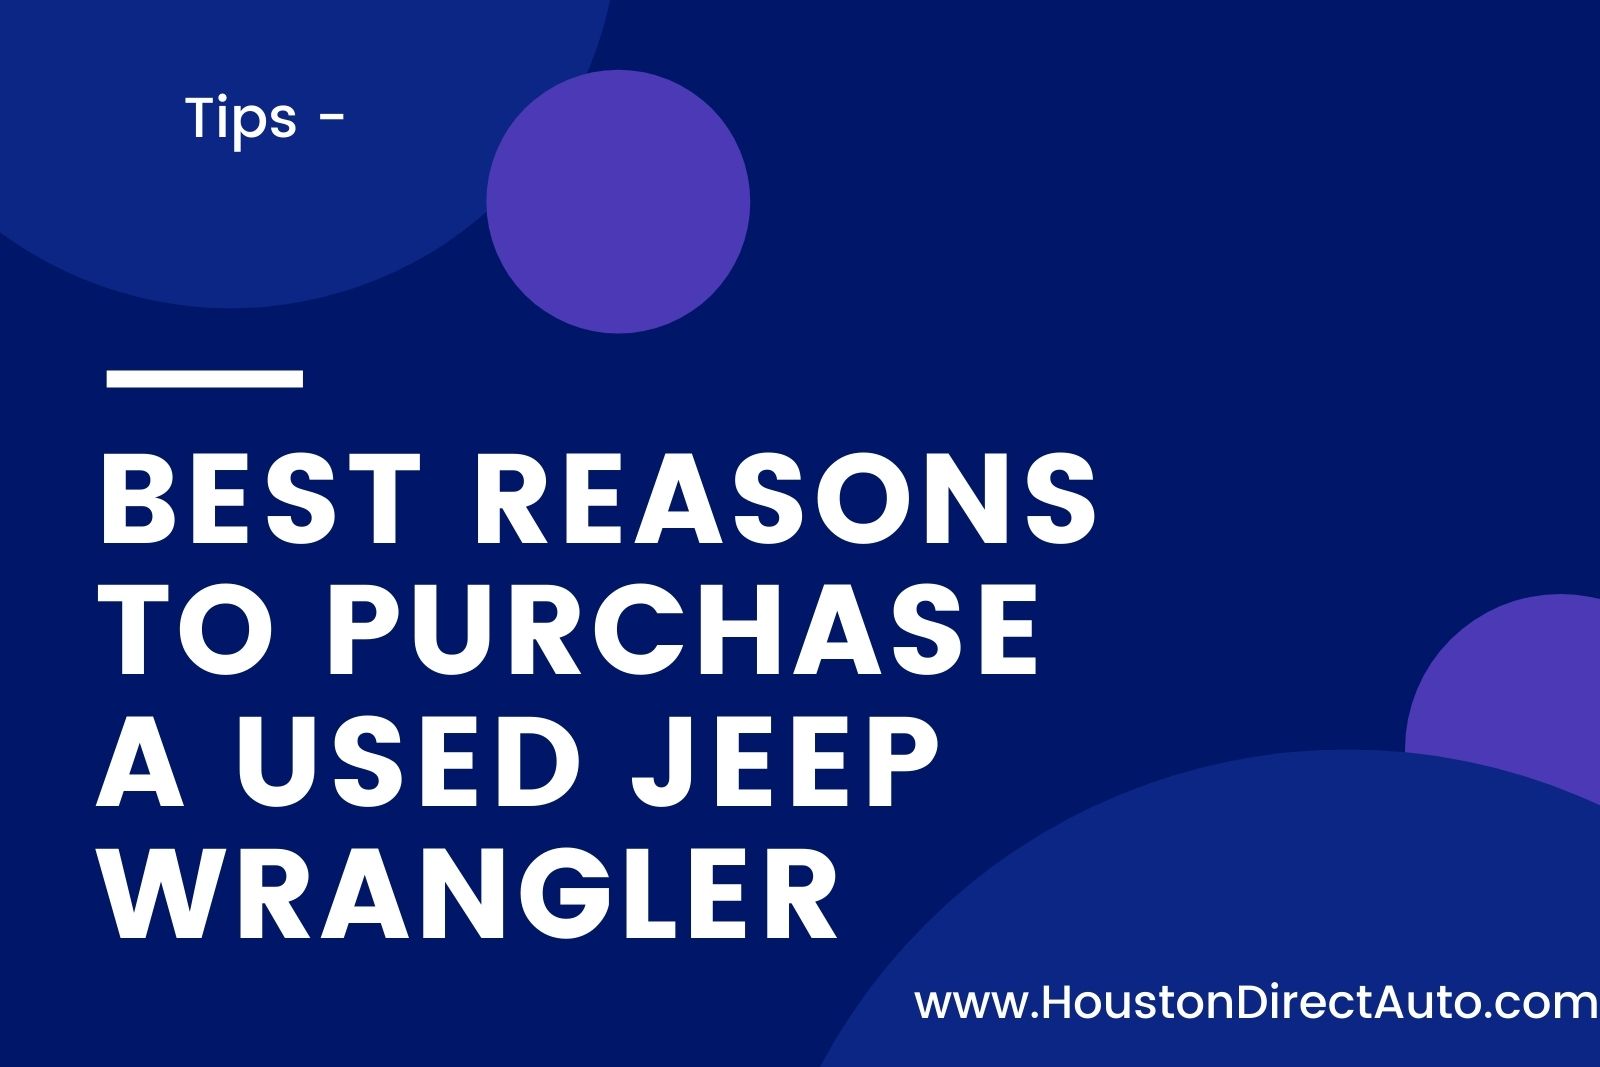 Best Reasons To Purchase A Used Jeep Wrangler